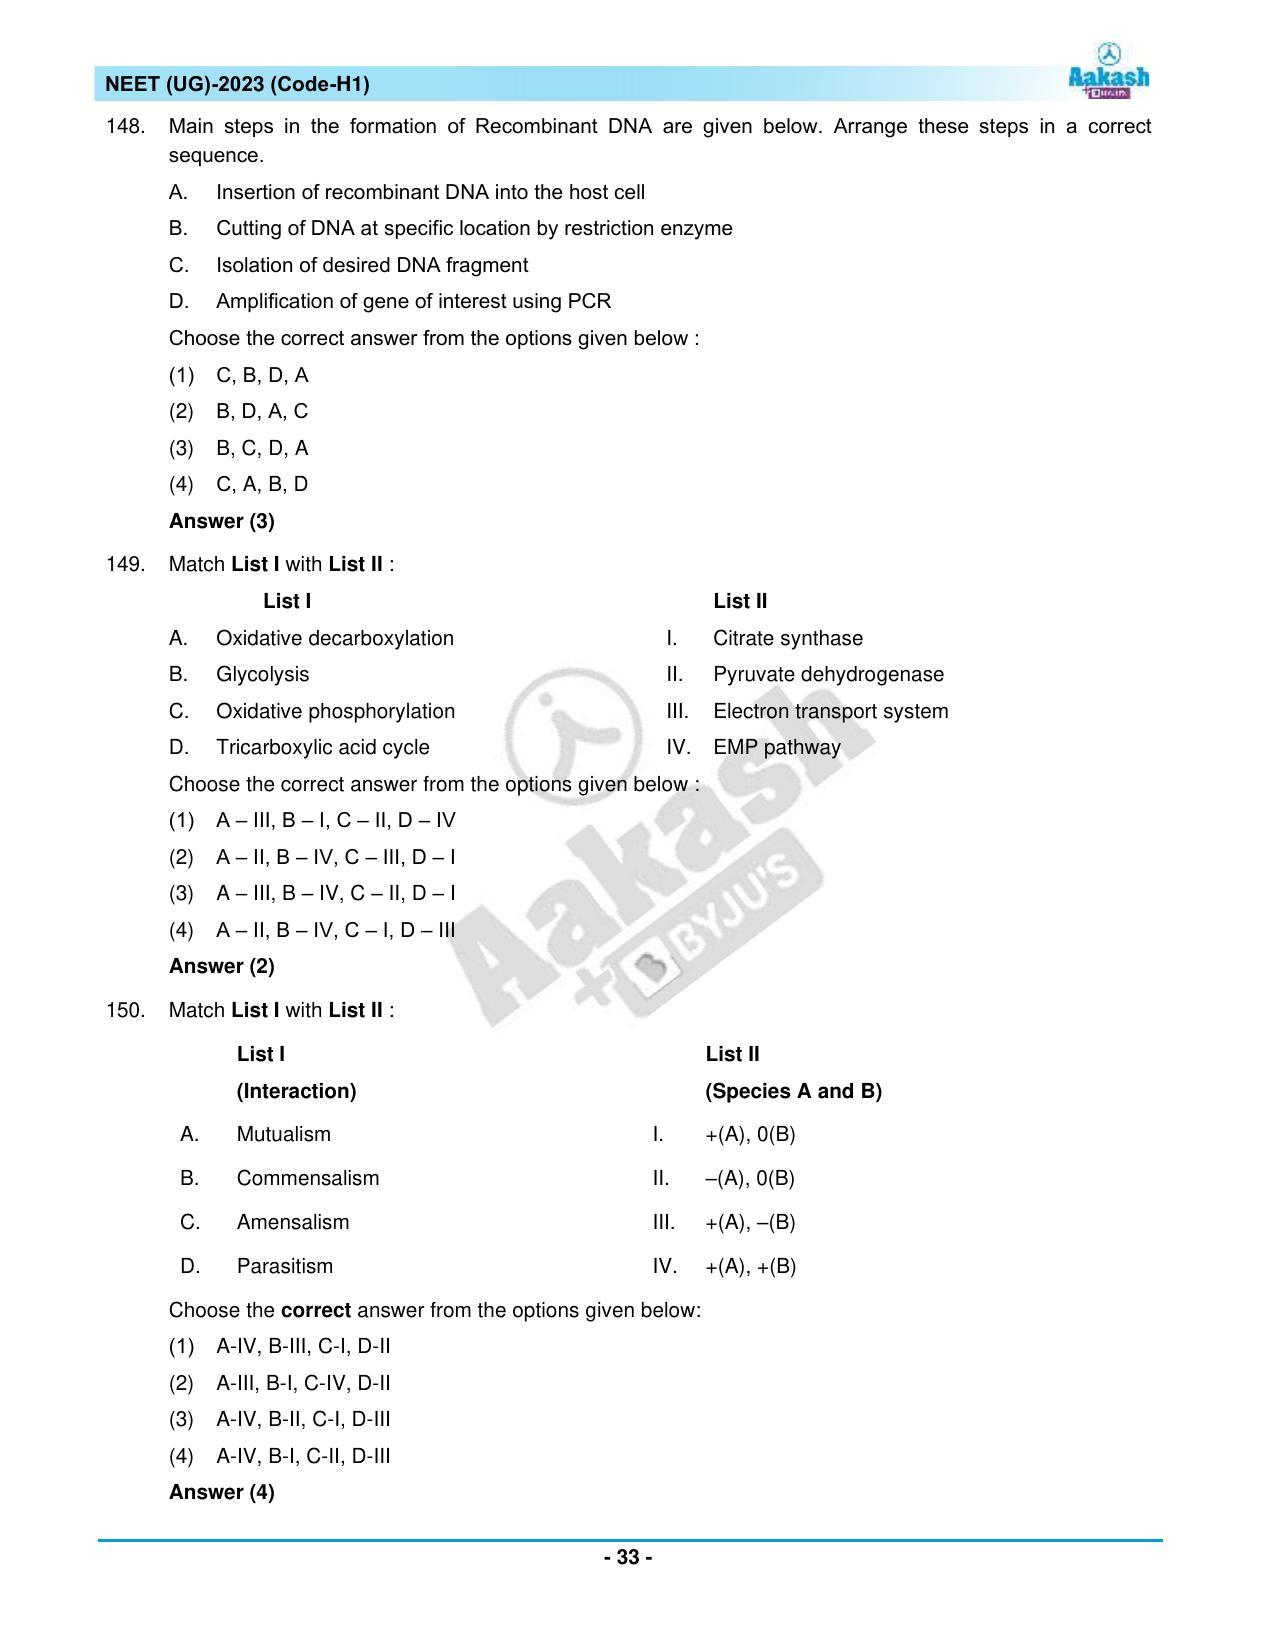 NEET 2023 Question Paper H1 - Page 33